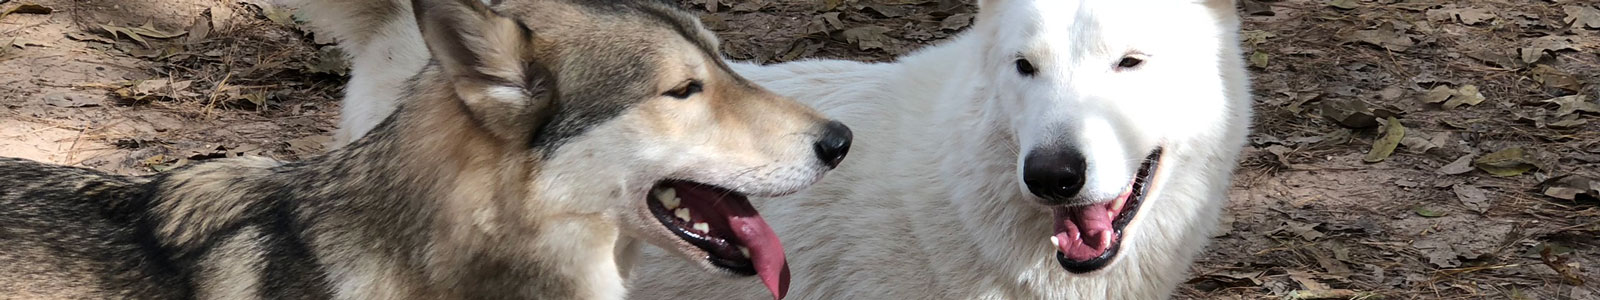 Texas Wolfdog Project Happy Tails Header Image